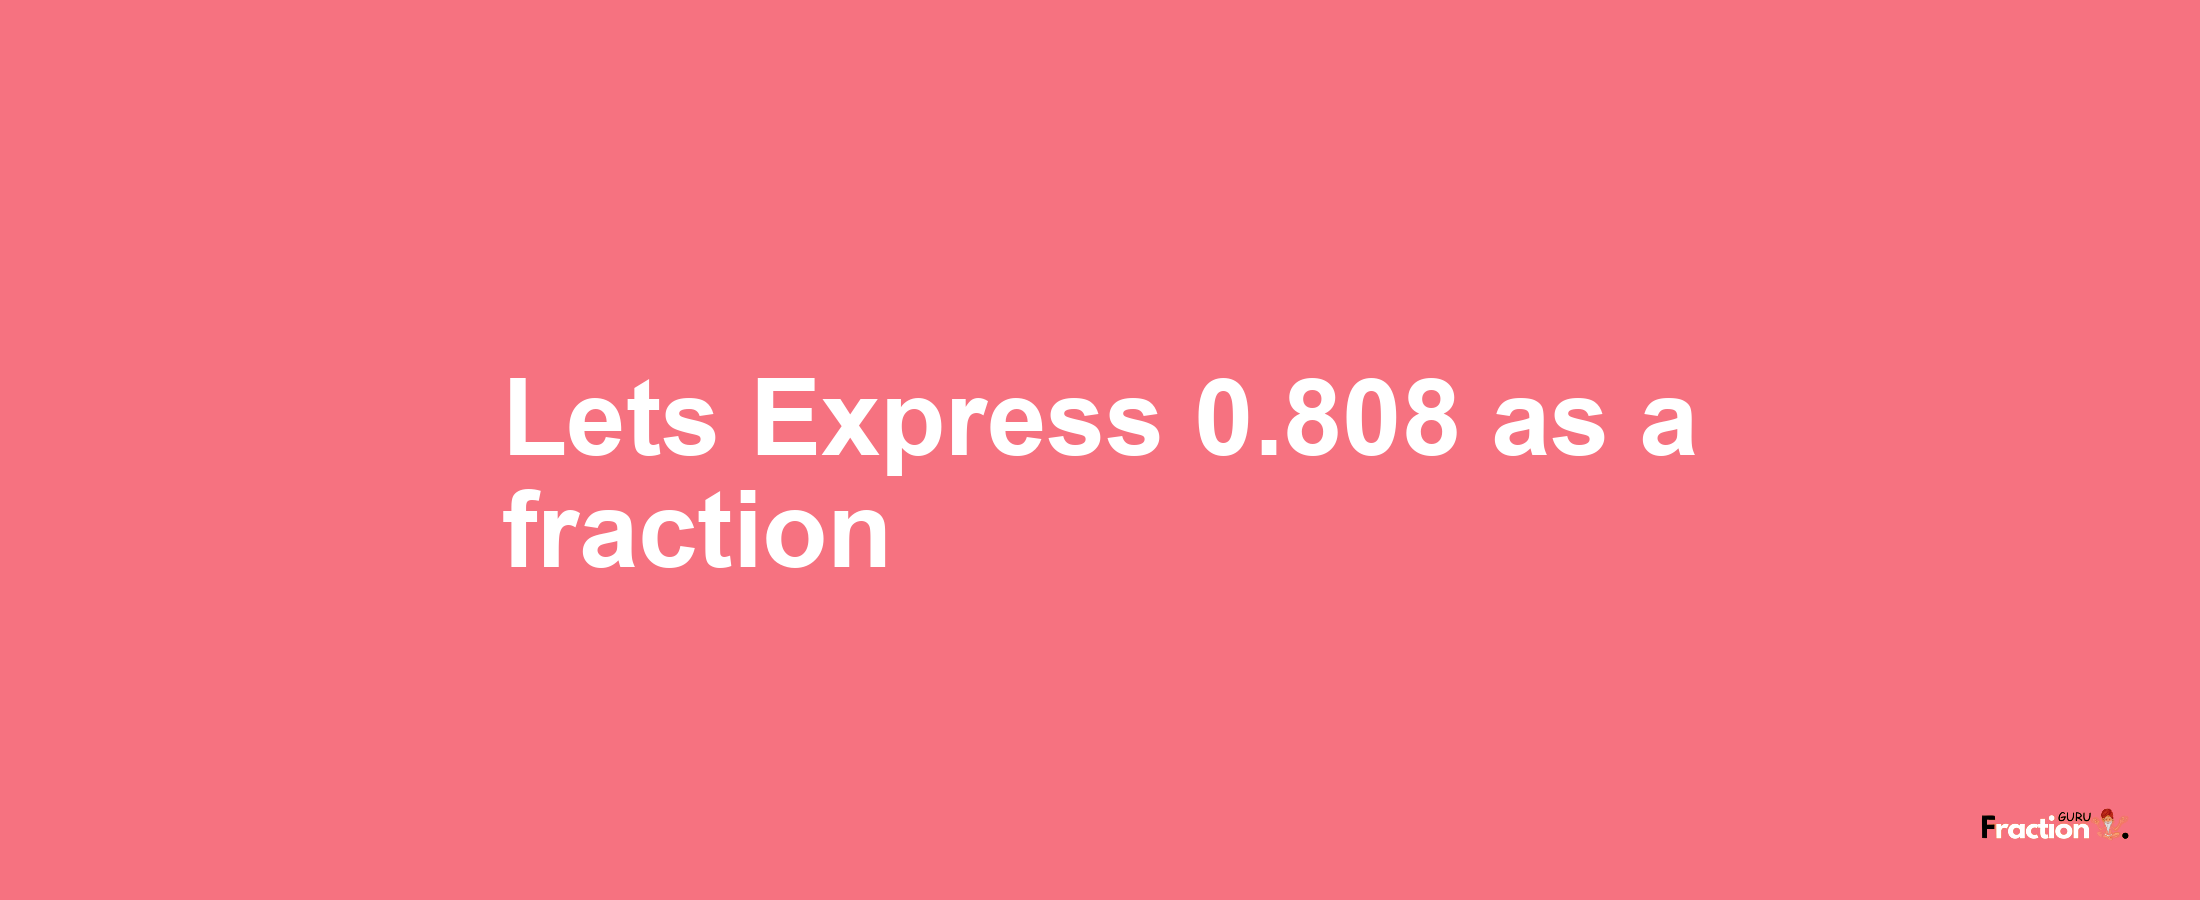 Lets Express 0.808 as afraction